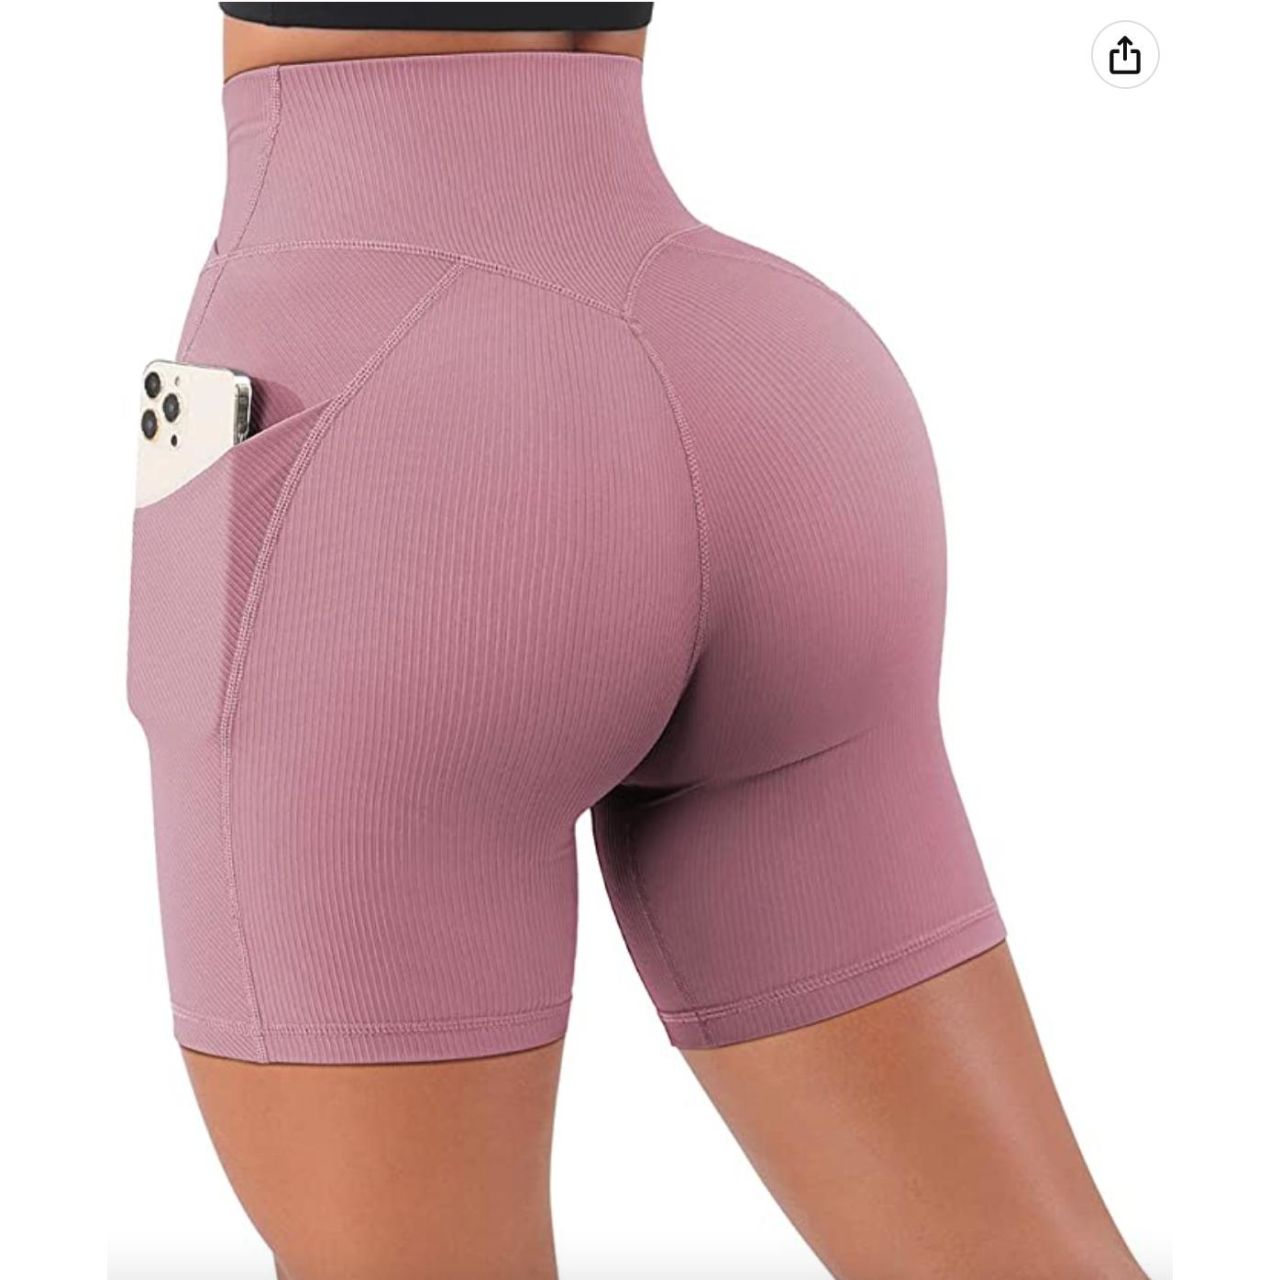 Kydra Athletics - VPL, chaffing, leggings riding down - activewear problems  we have heard and experienced 😪 But does it have to be this way? Check out  #linkinbio on how we dealt